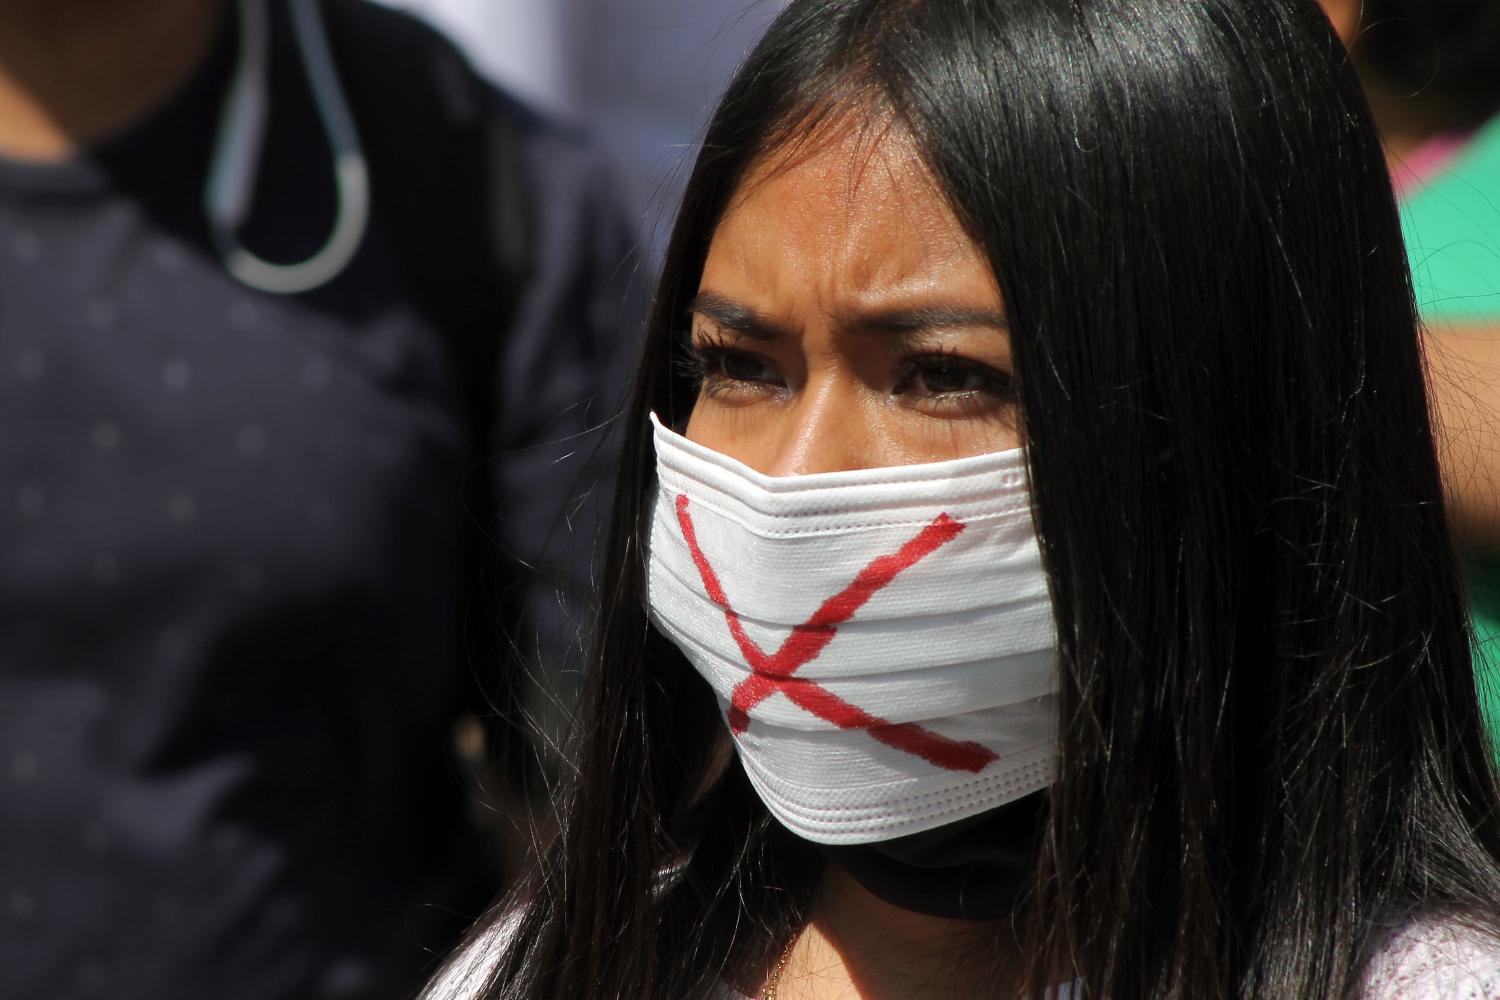 A woman wears a face mask with a X takes part during a protest in the historic center, demanding to the authorities resumption their works of Shop eyeglasses and optics on October 27, 2020 in Mexico City, MexicoWhere: Mexico City, MexicoWhen: 27 Oct 2020Credit: Eyepix/Cover Images